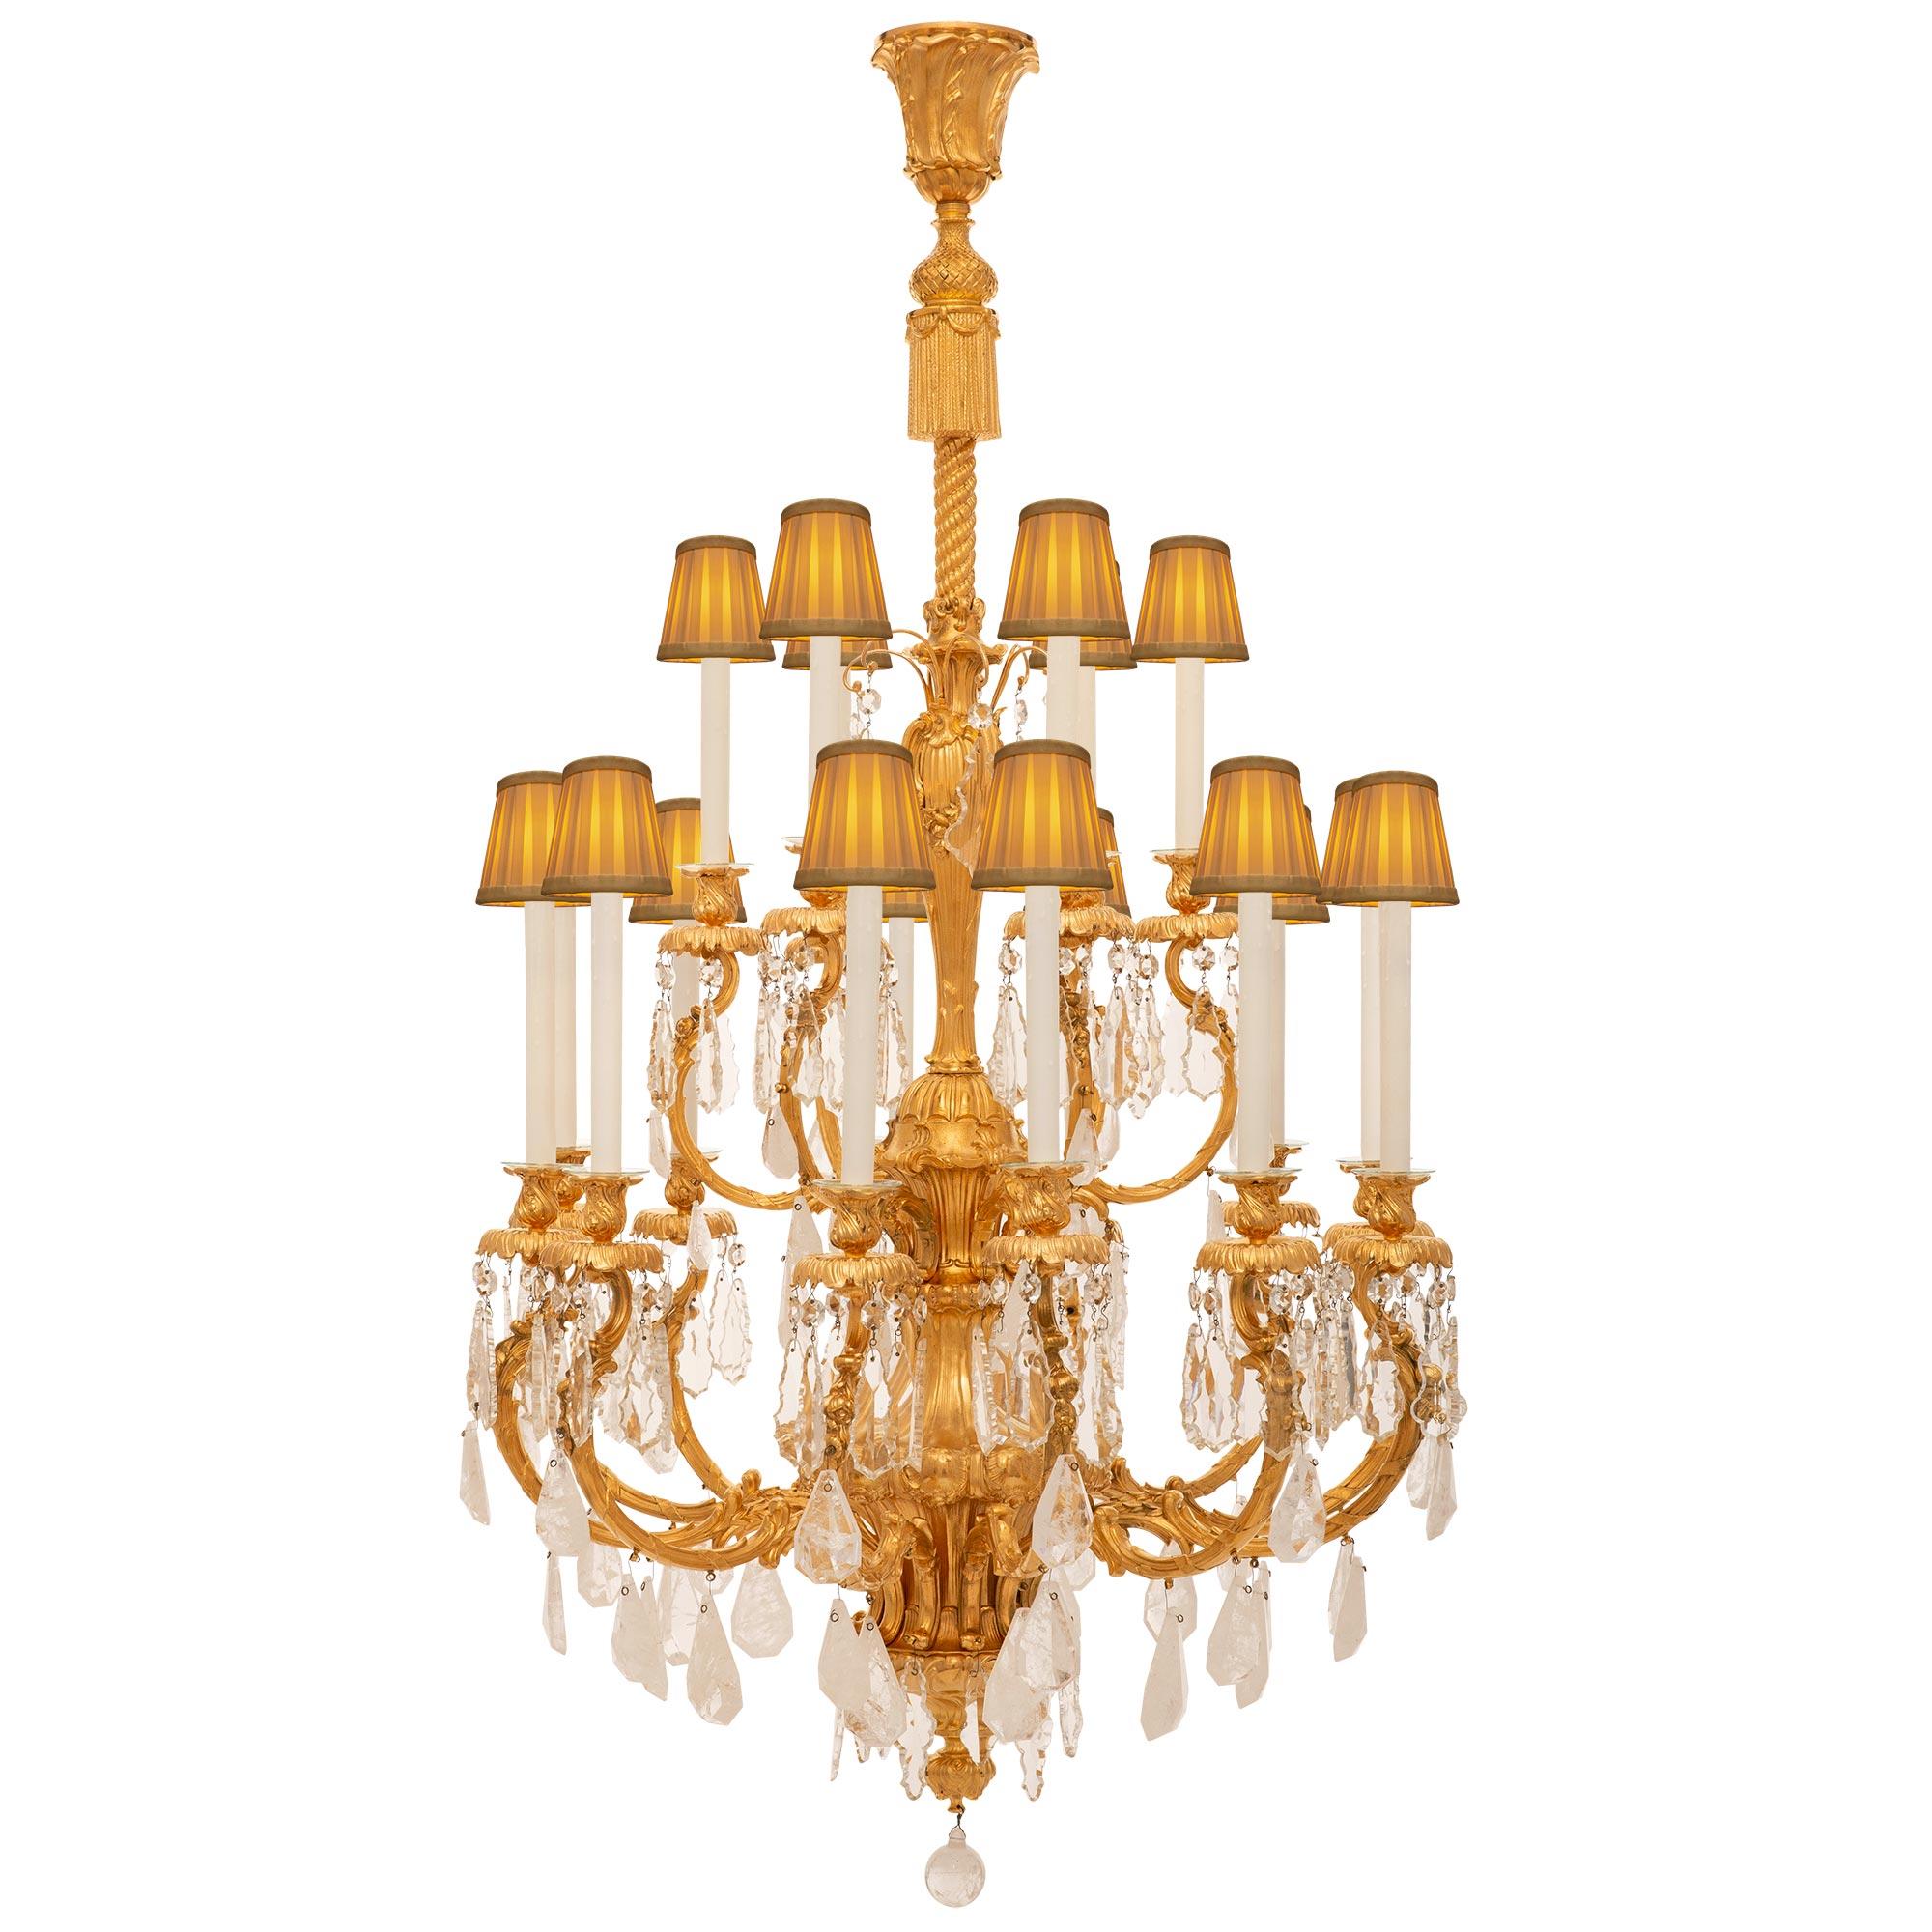 French Louis XV St. Ormolu, Rock Crystal & Baccarat Crystal Chandelier For Sale 5